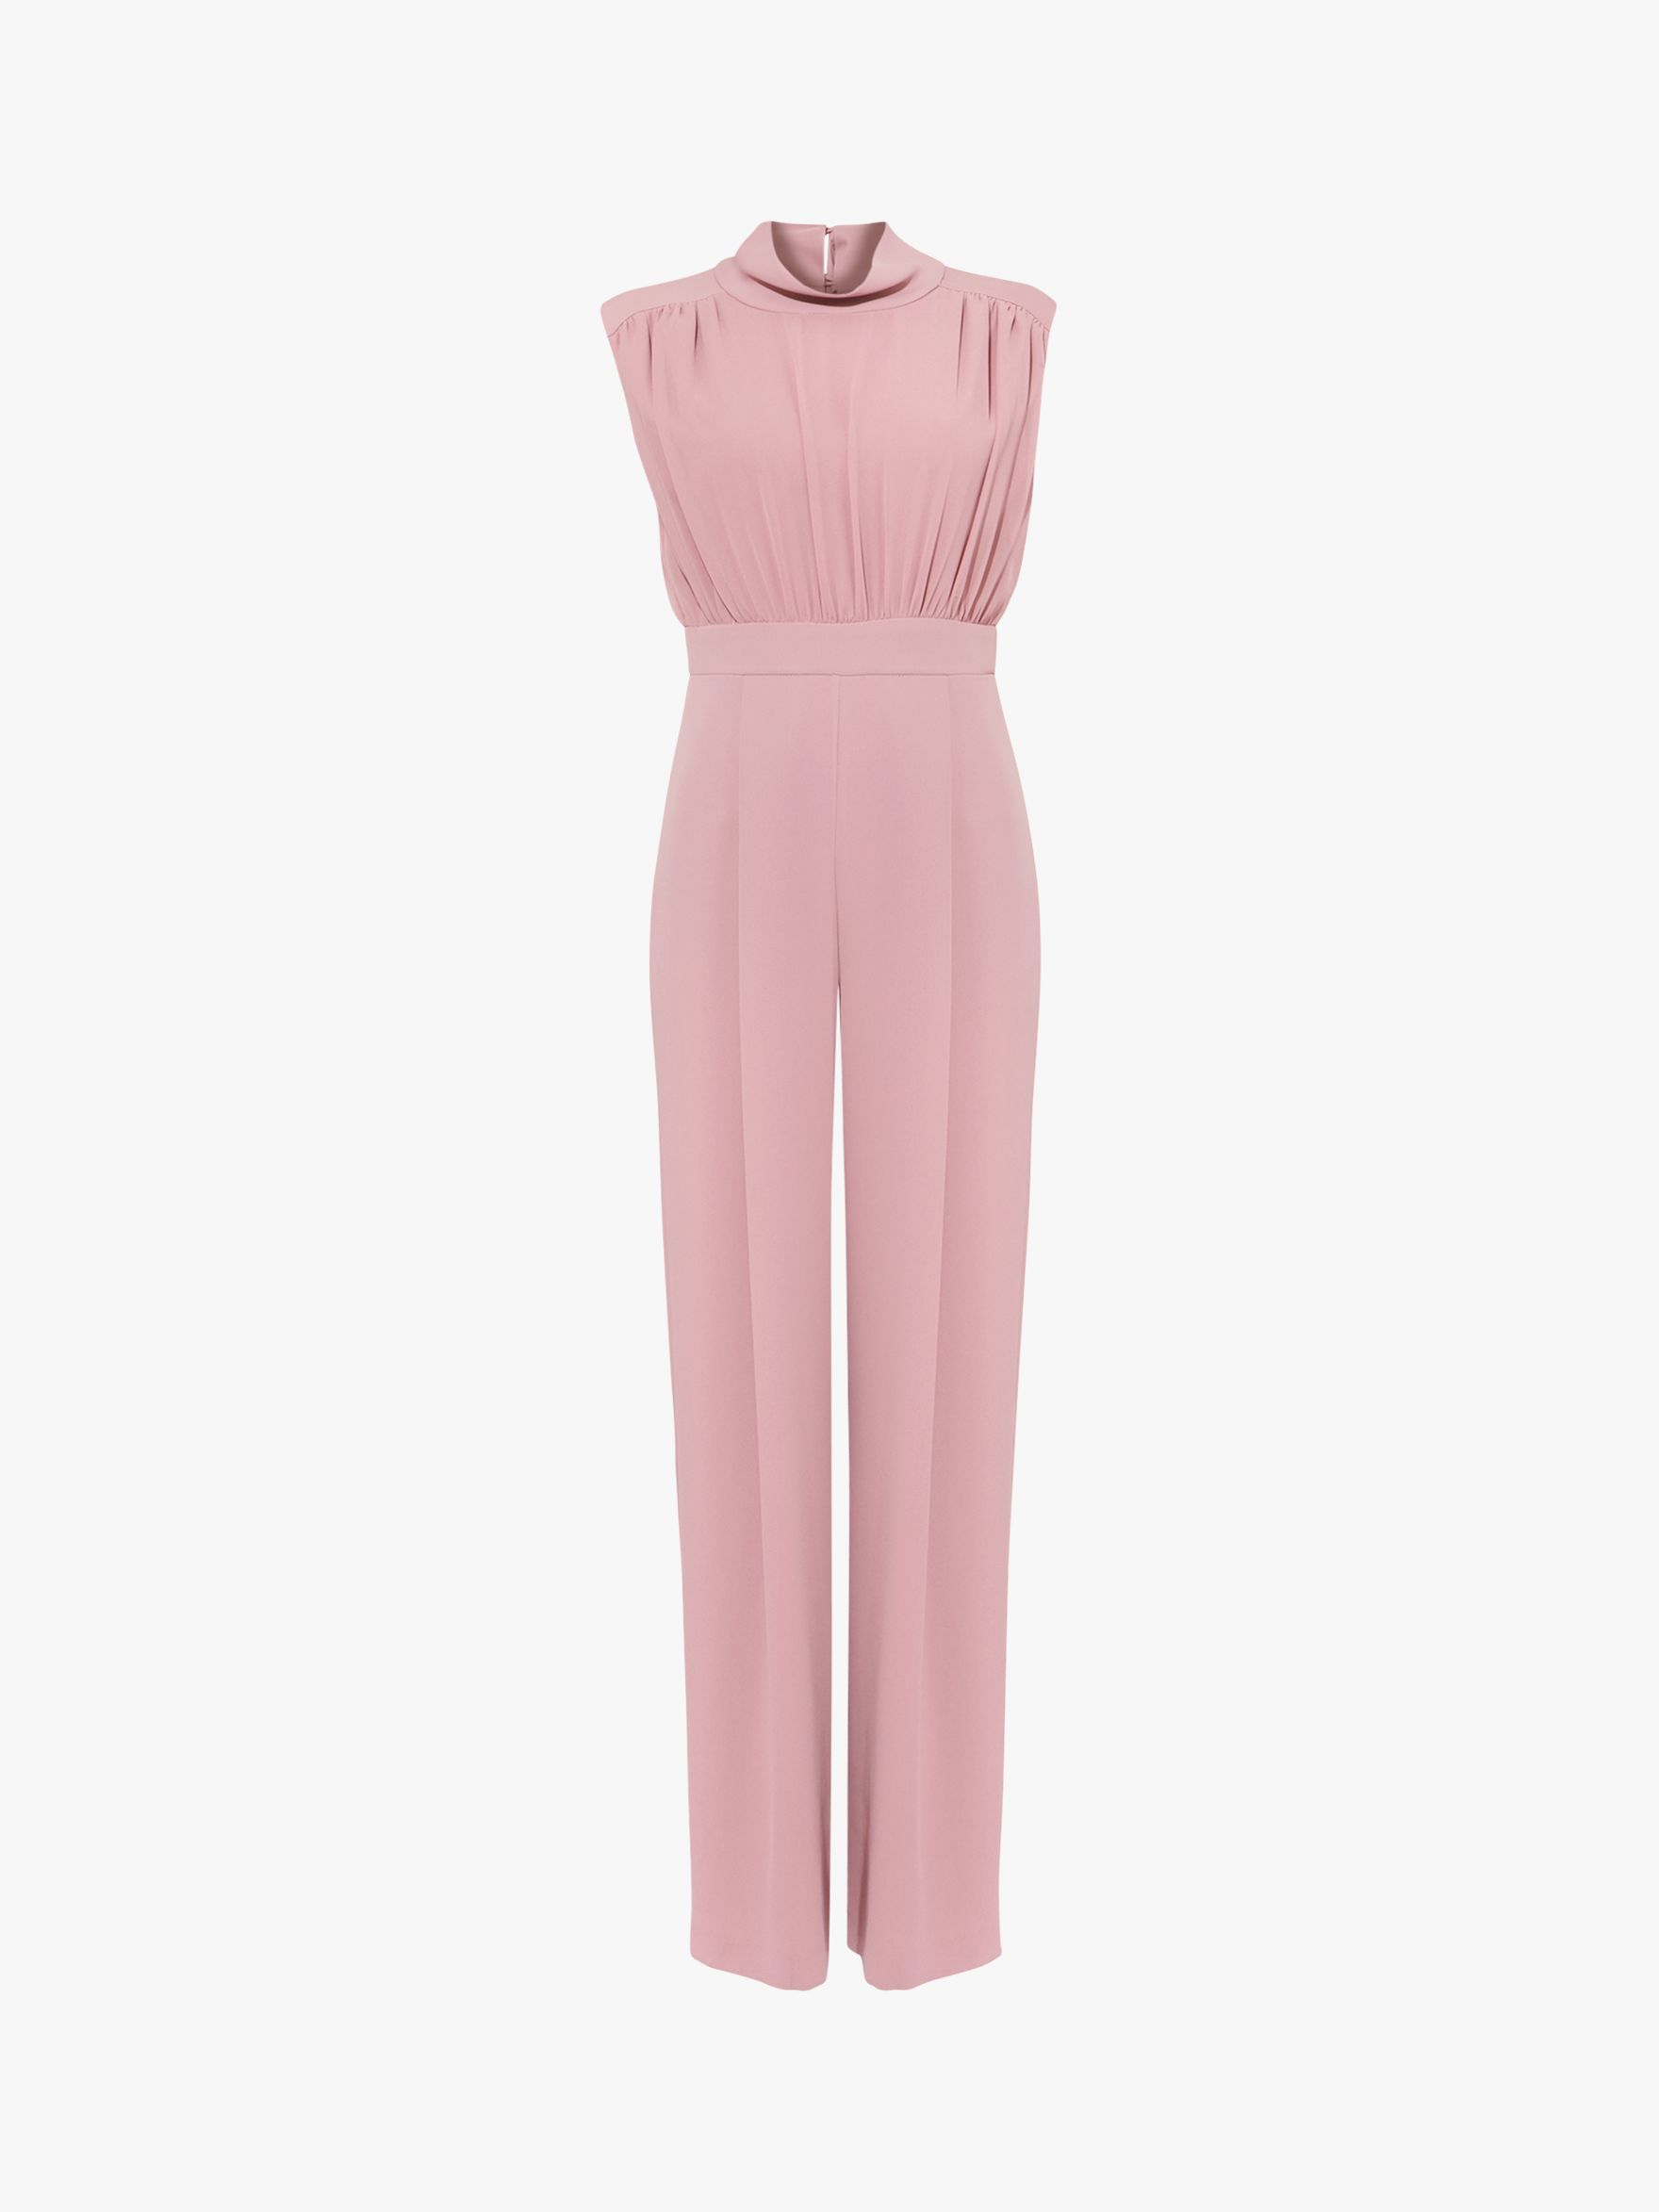 Phase Eight Sharon Tie Neck Jumpsuit, Rose Taupe